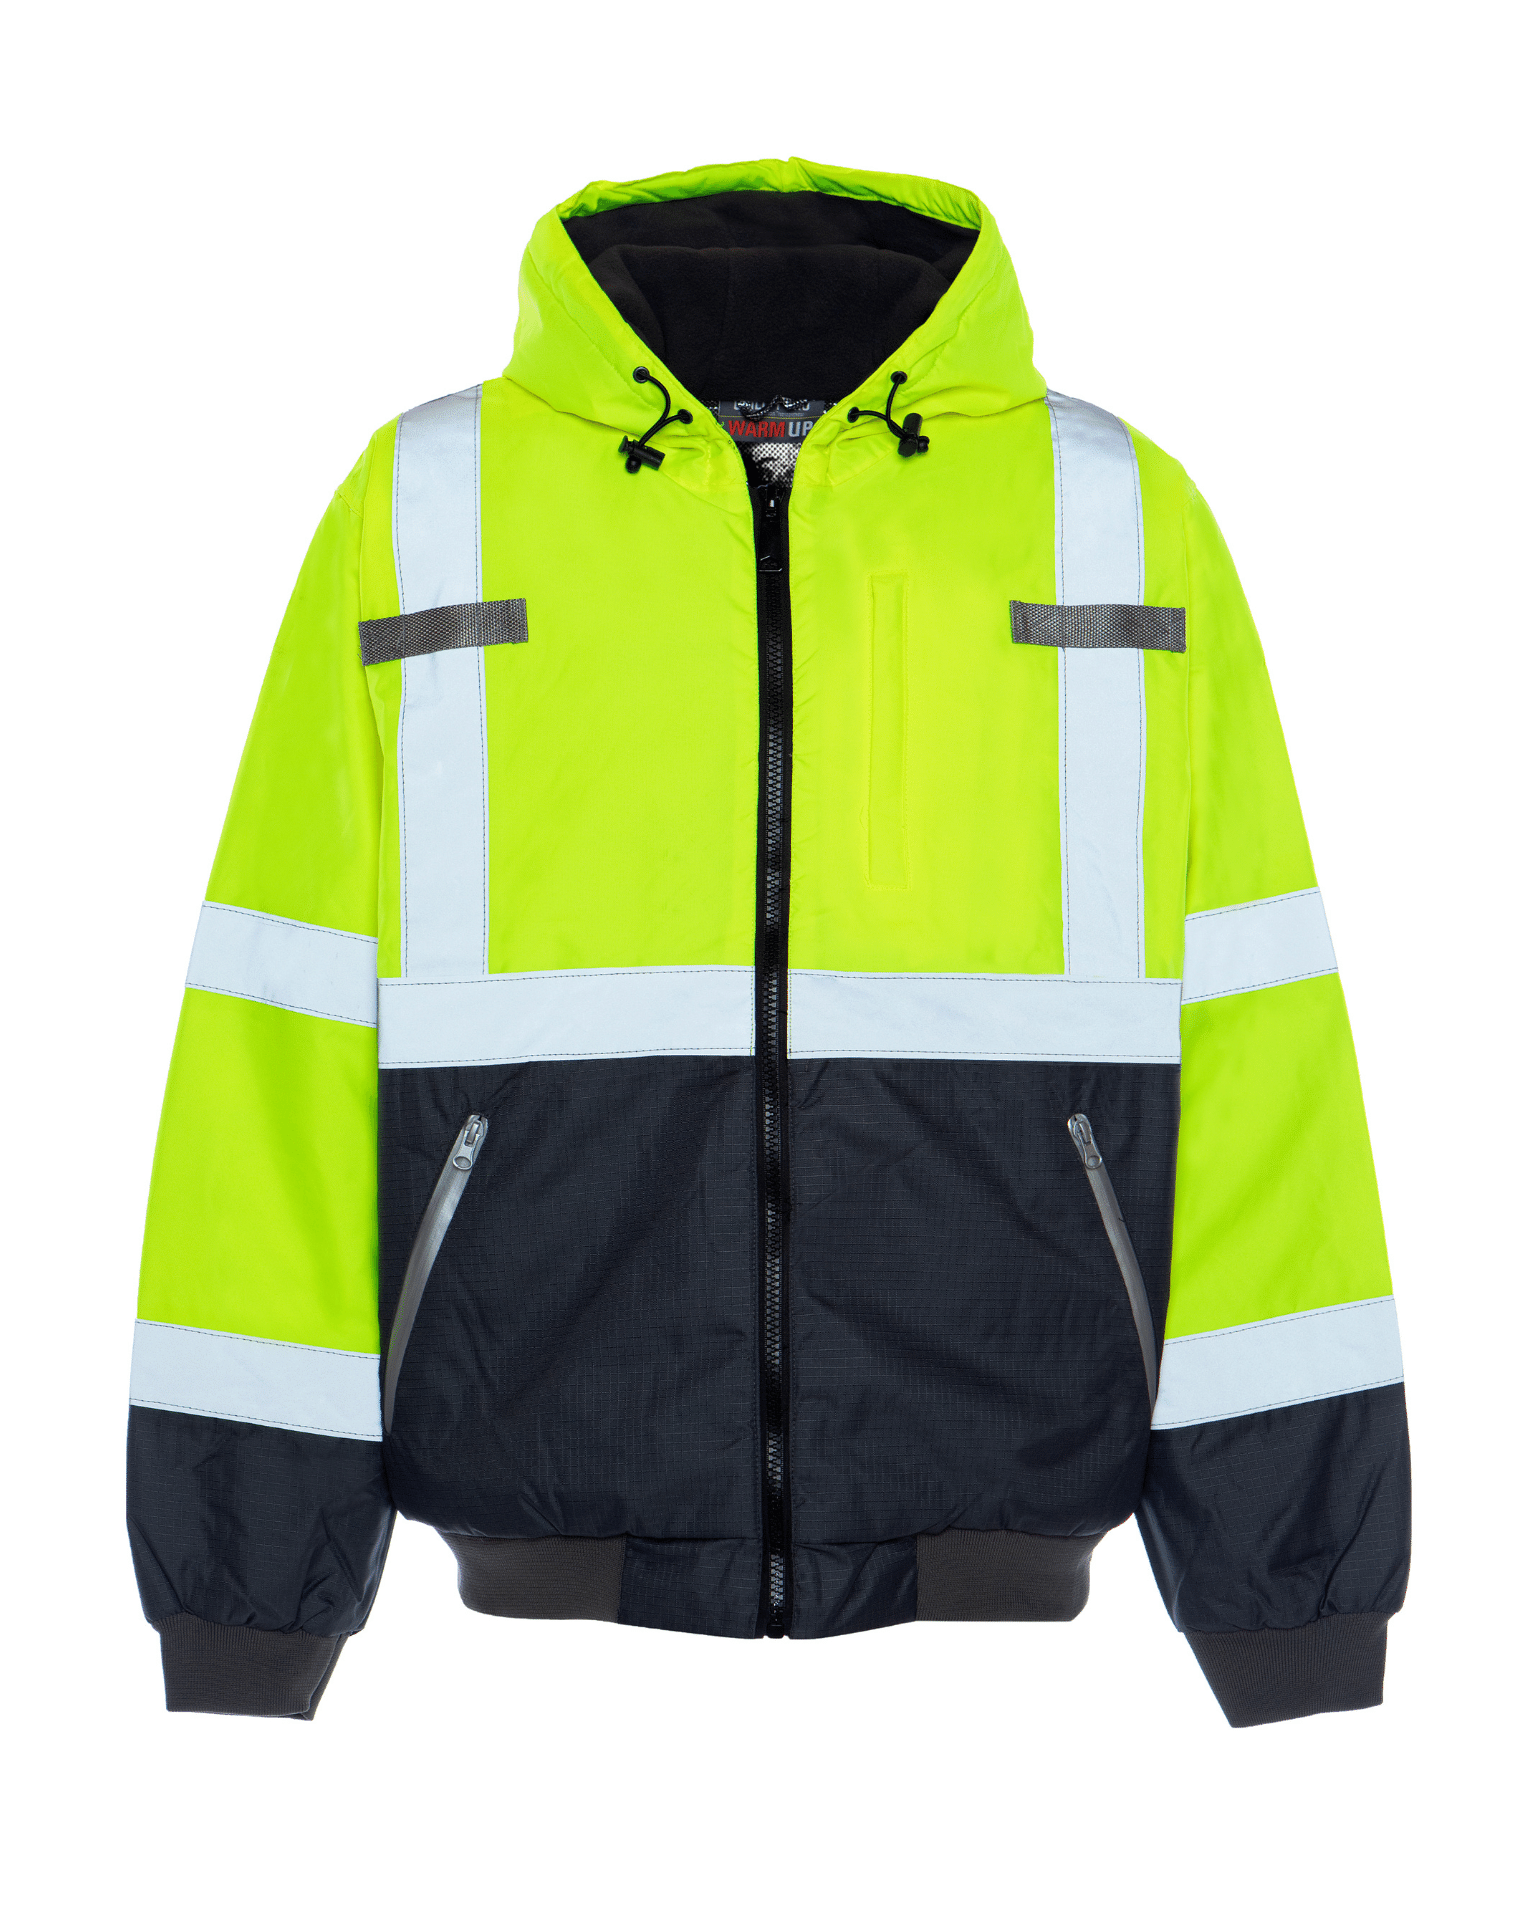 ANSI Type R Class 3 High Visibility heat reflective lining insulated hood teflon polyester bomber jacket by Utility Pro